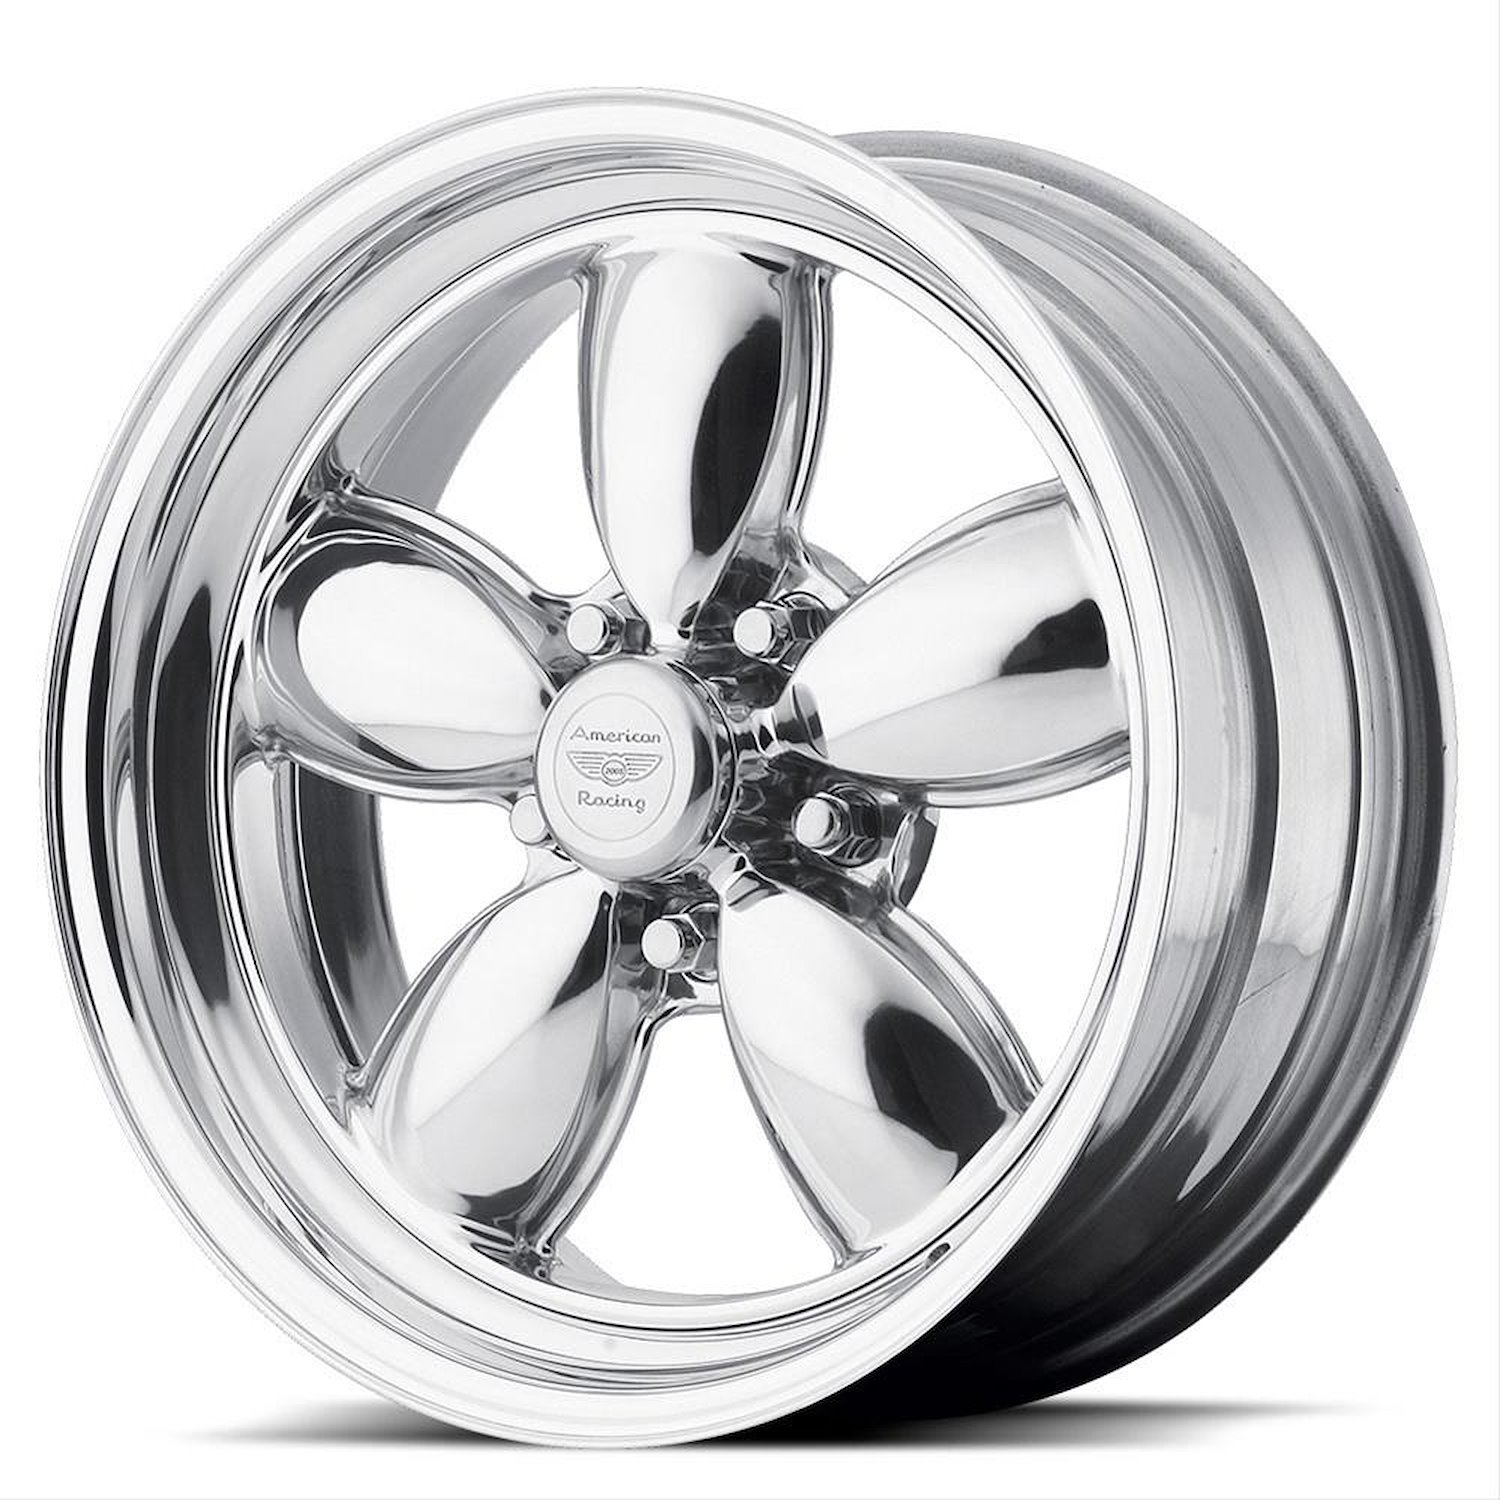 AMERICAN RACING CLASSIC 200S TWO-PIECE POLISHED 17 x 7 5X4.75 -6 3.76